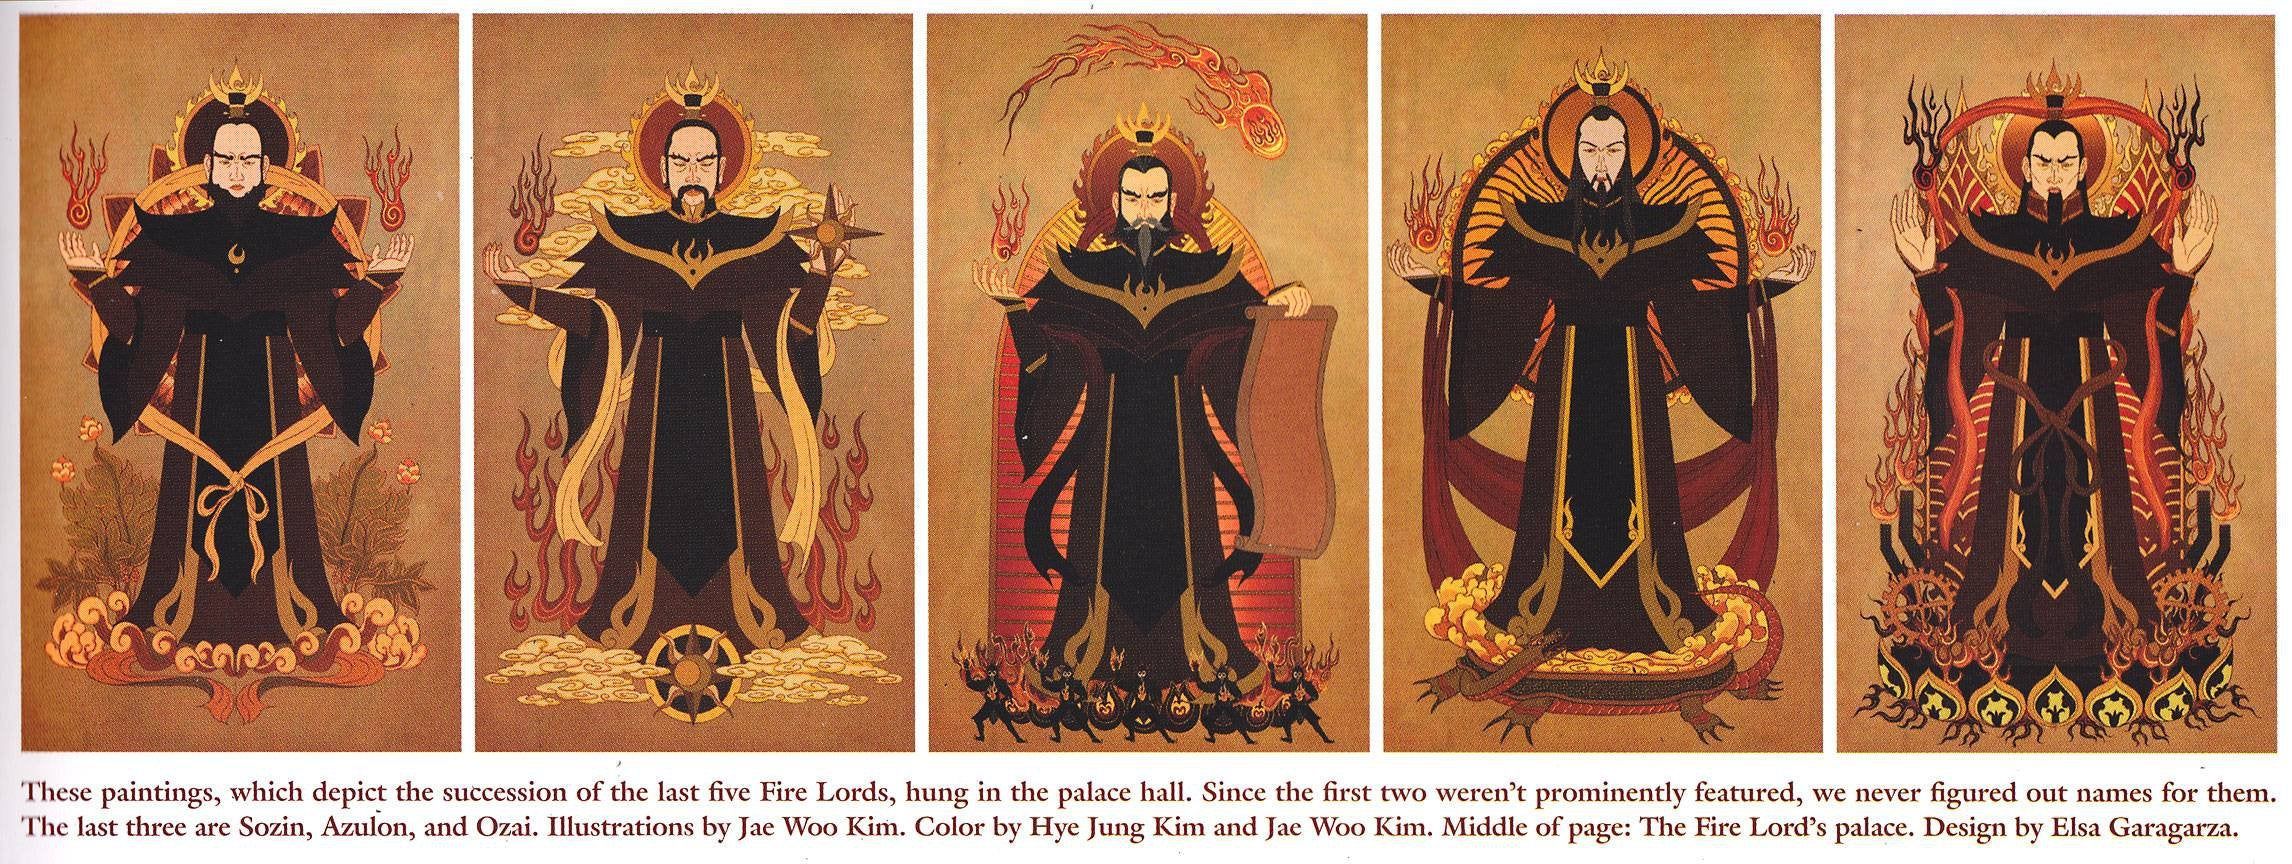 It's time for a Fire Nation history lesson for all you plebs